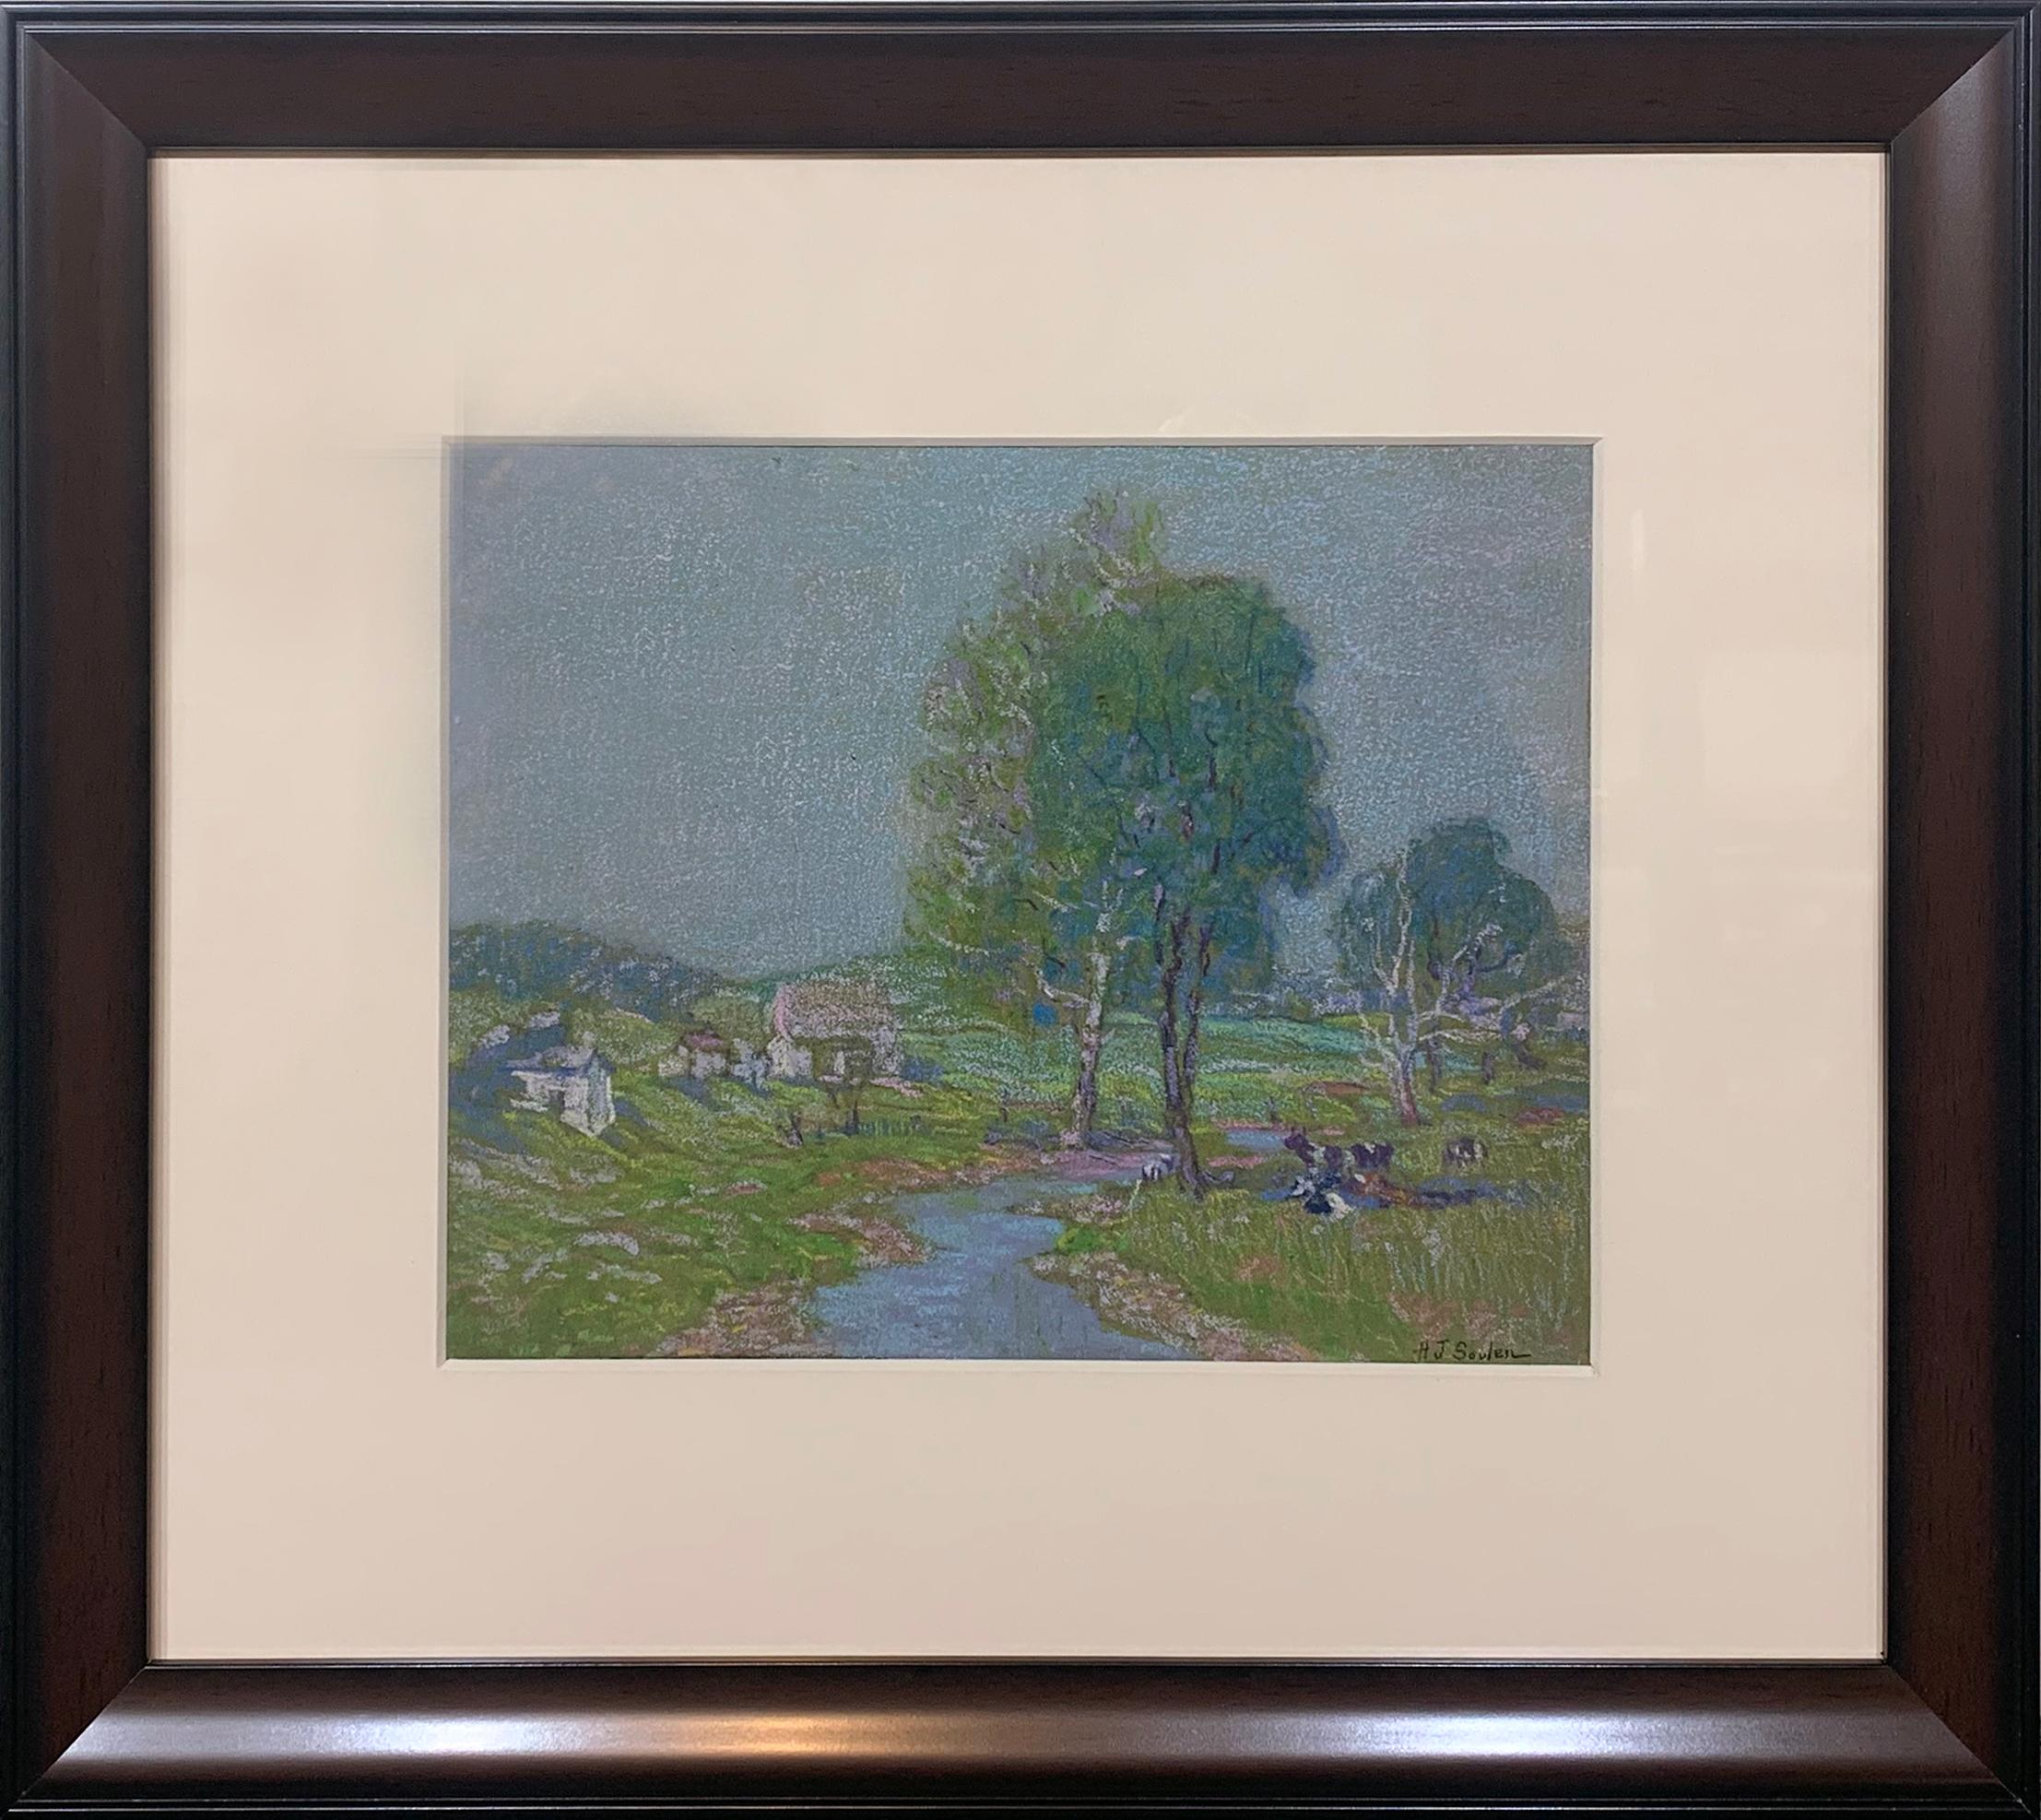 Landscape with Cows and Homes by a Stream, Pastel on Paper, Original Art